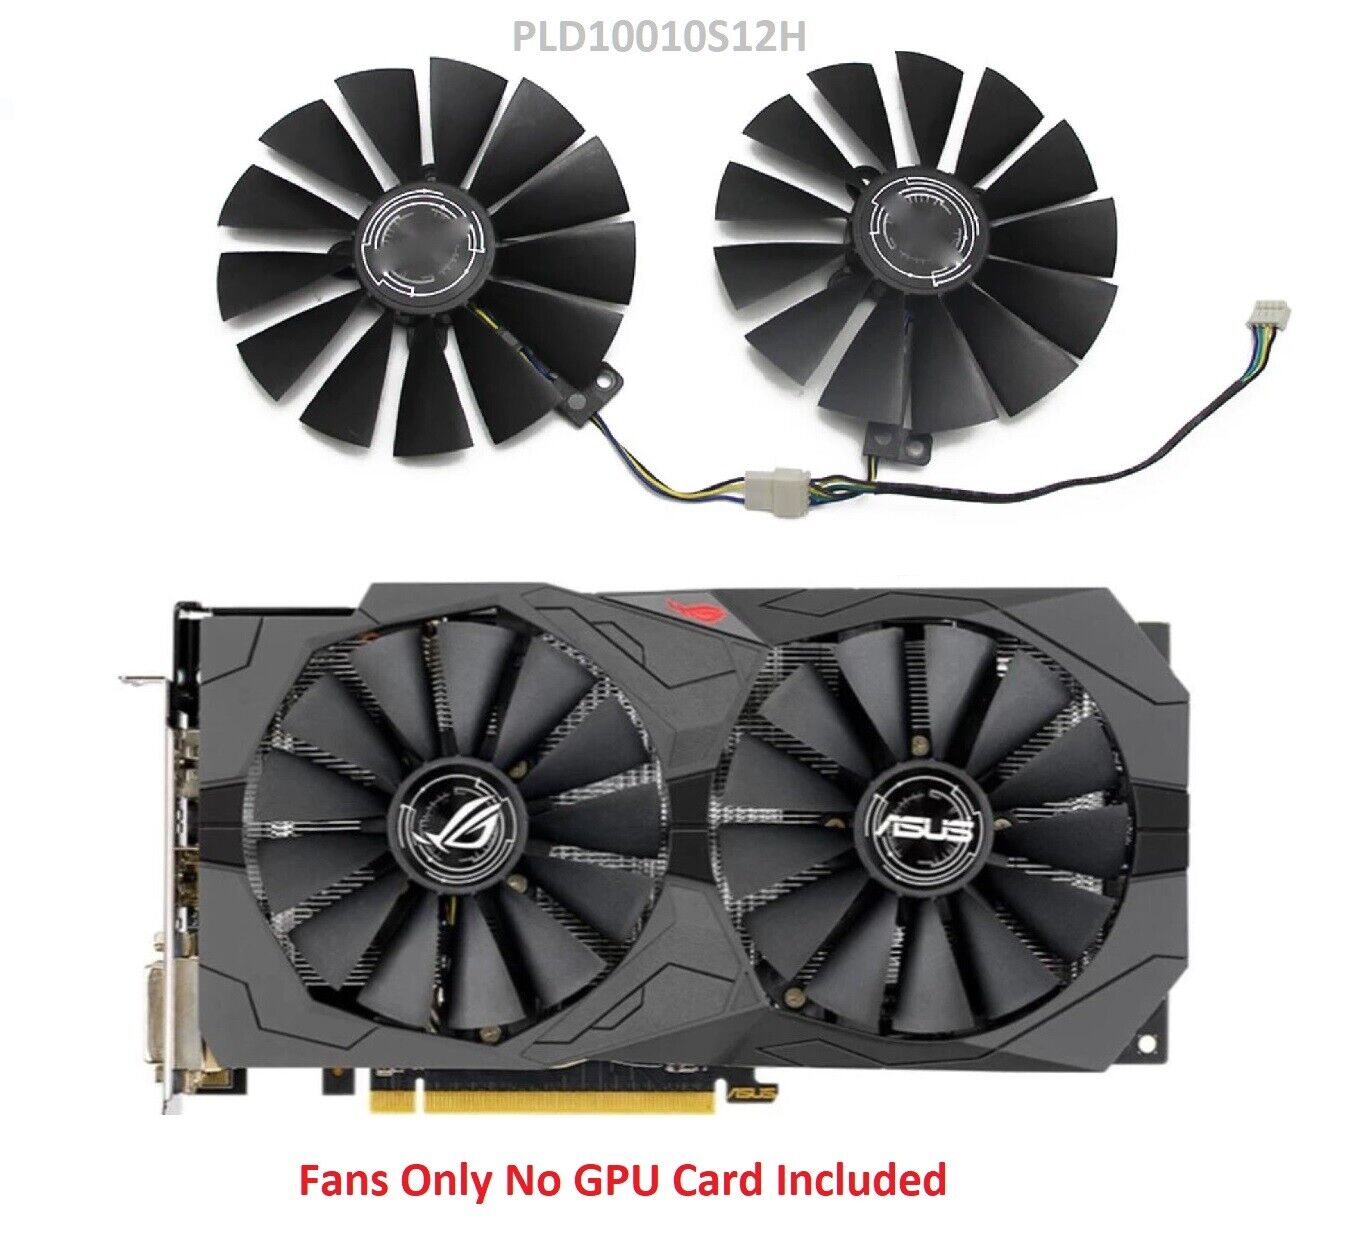 95MM PLD10010S12H Cooler Fan For ASUS ROG STRIX Dual RX 470 580 AMD RX470 RX480